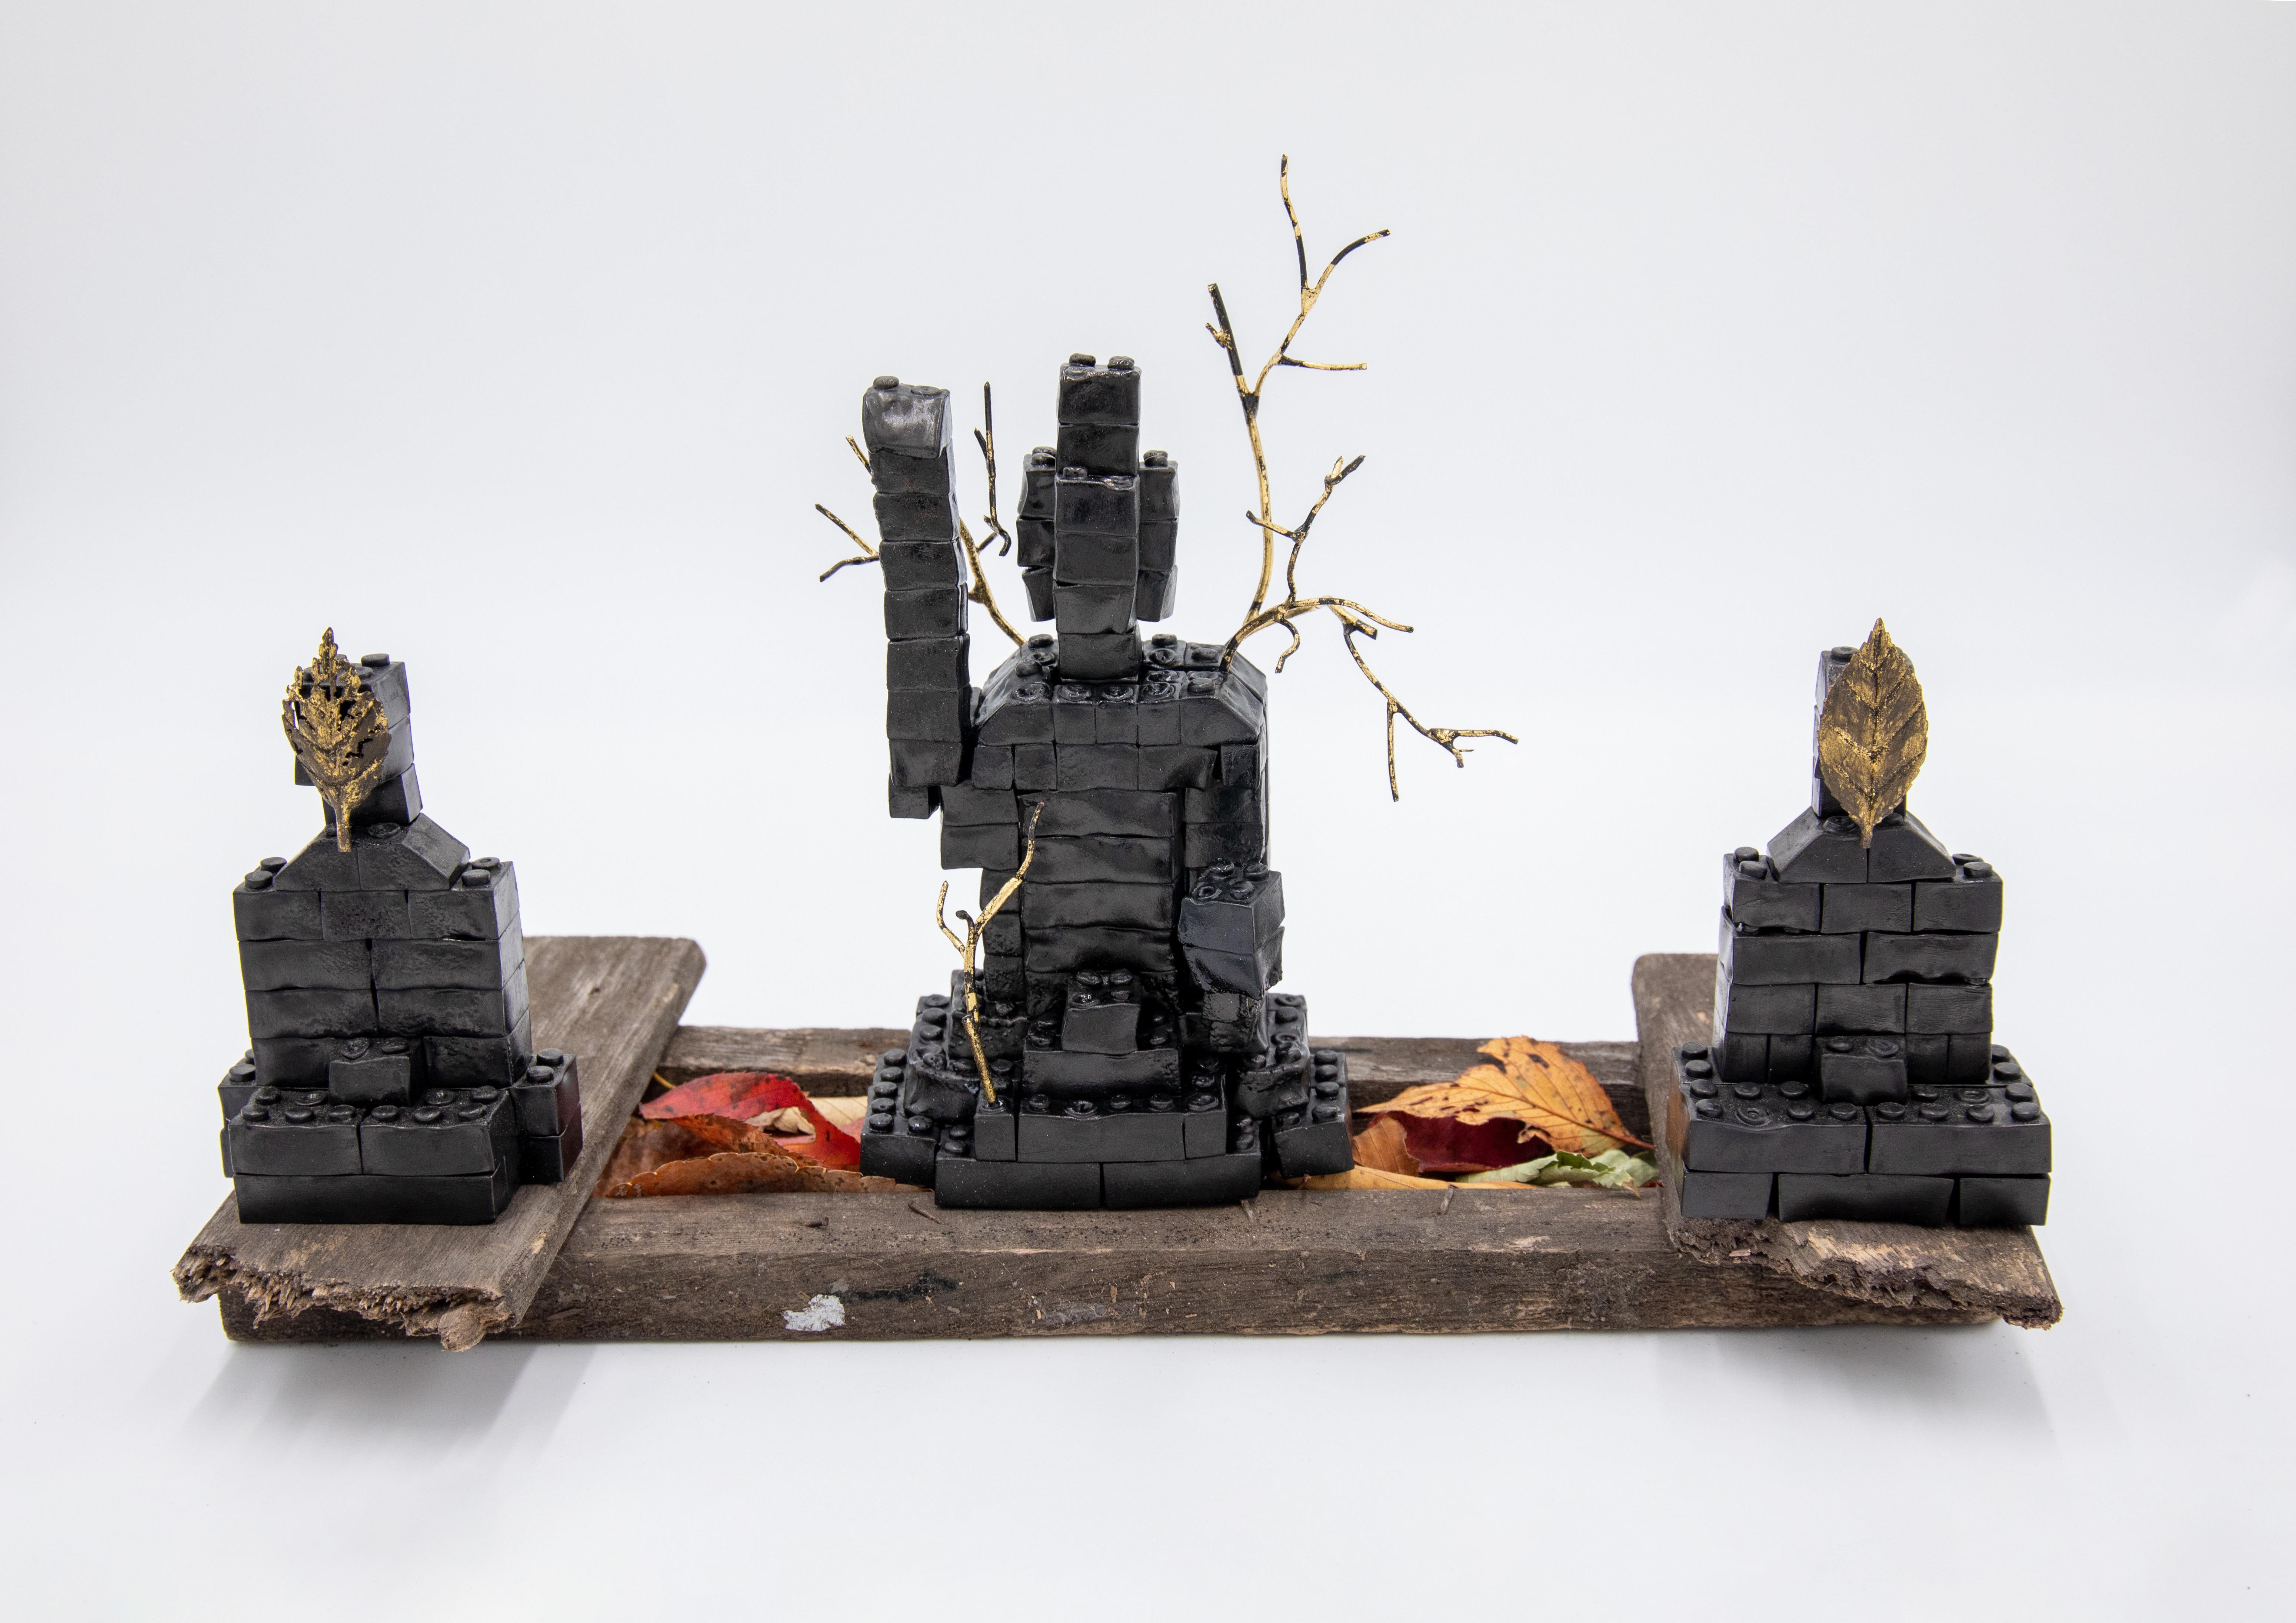 Lego, bayberry wood, discarded wood, copper wire, cashew lacquer, gold leaf, dried leaves

This collaborative work, which began with a common interest in Buddhism, explored the idea of expressing the sacred within everyday life.

As artist and Zen